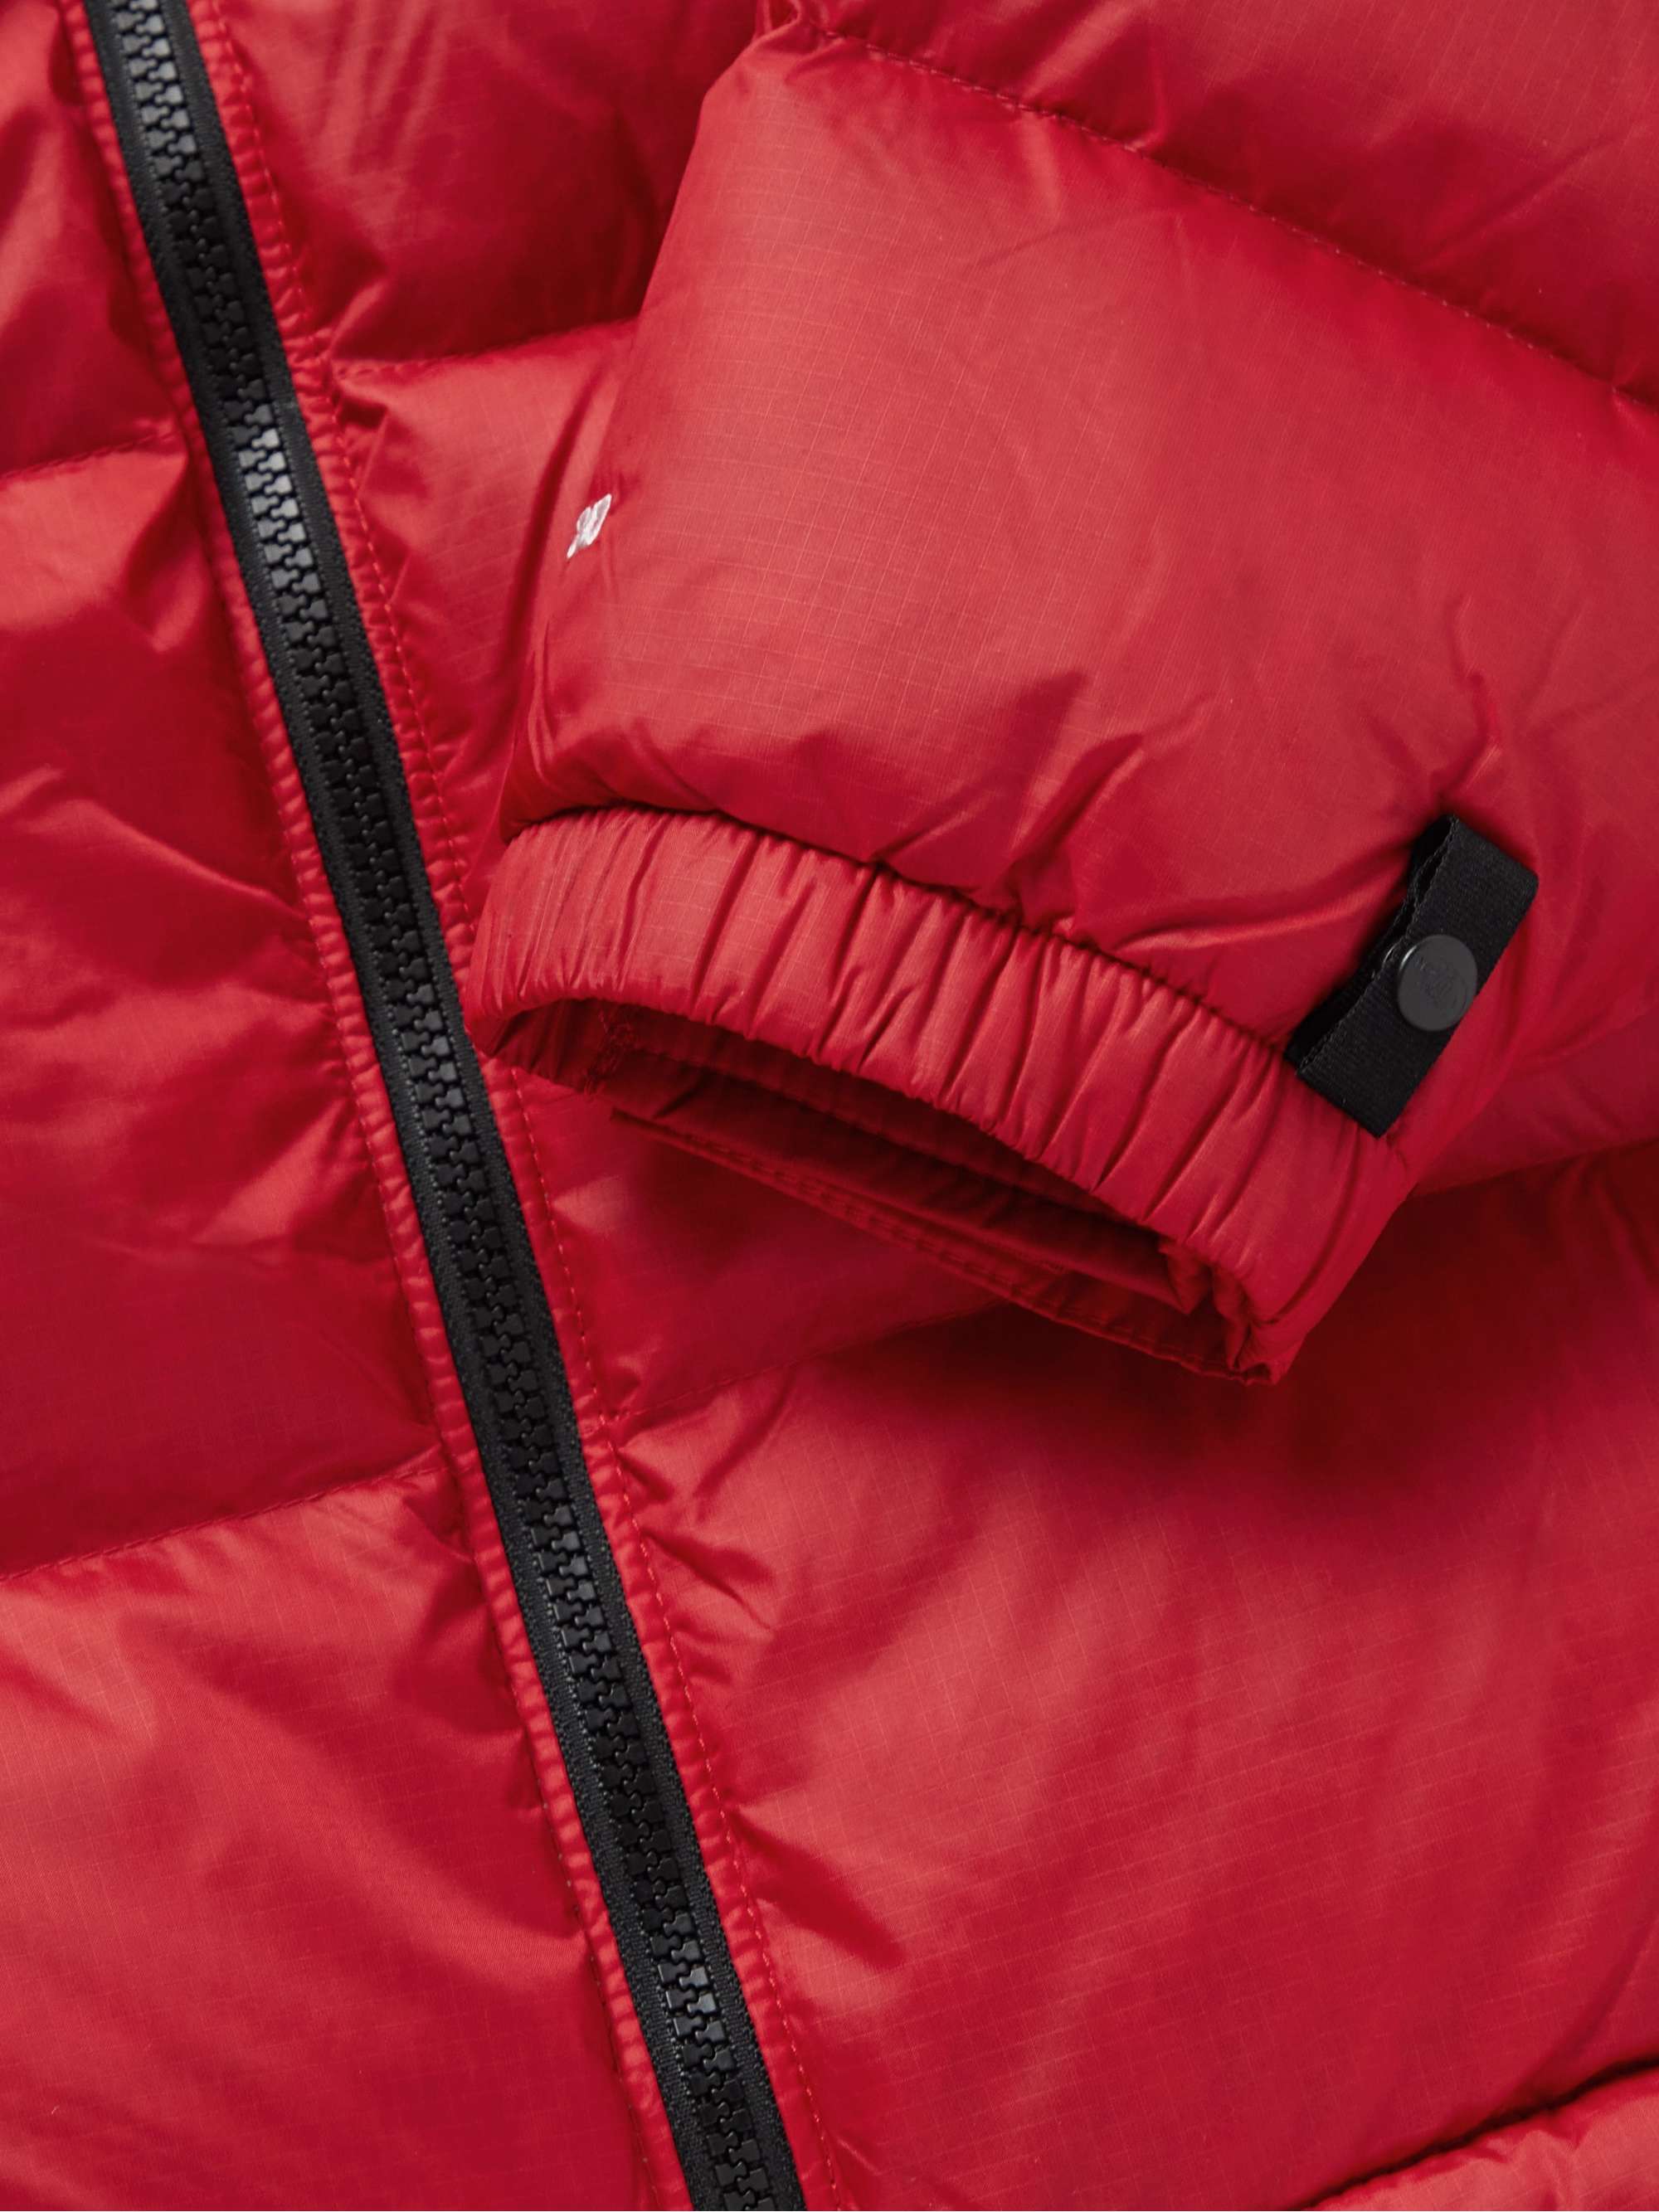 THE NORTH FACE 92 Retro Anniversary Nuptse Shell-Trimmed Ripstop Down Jacket